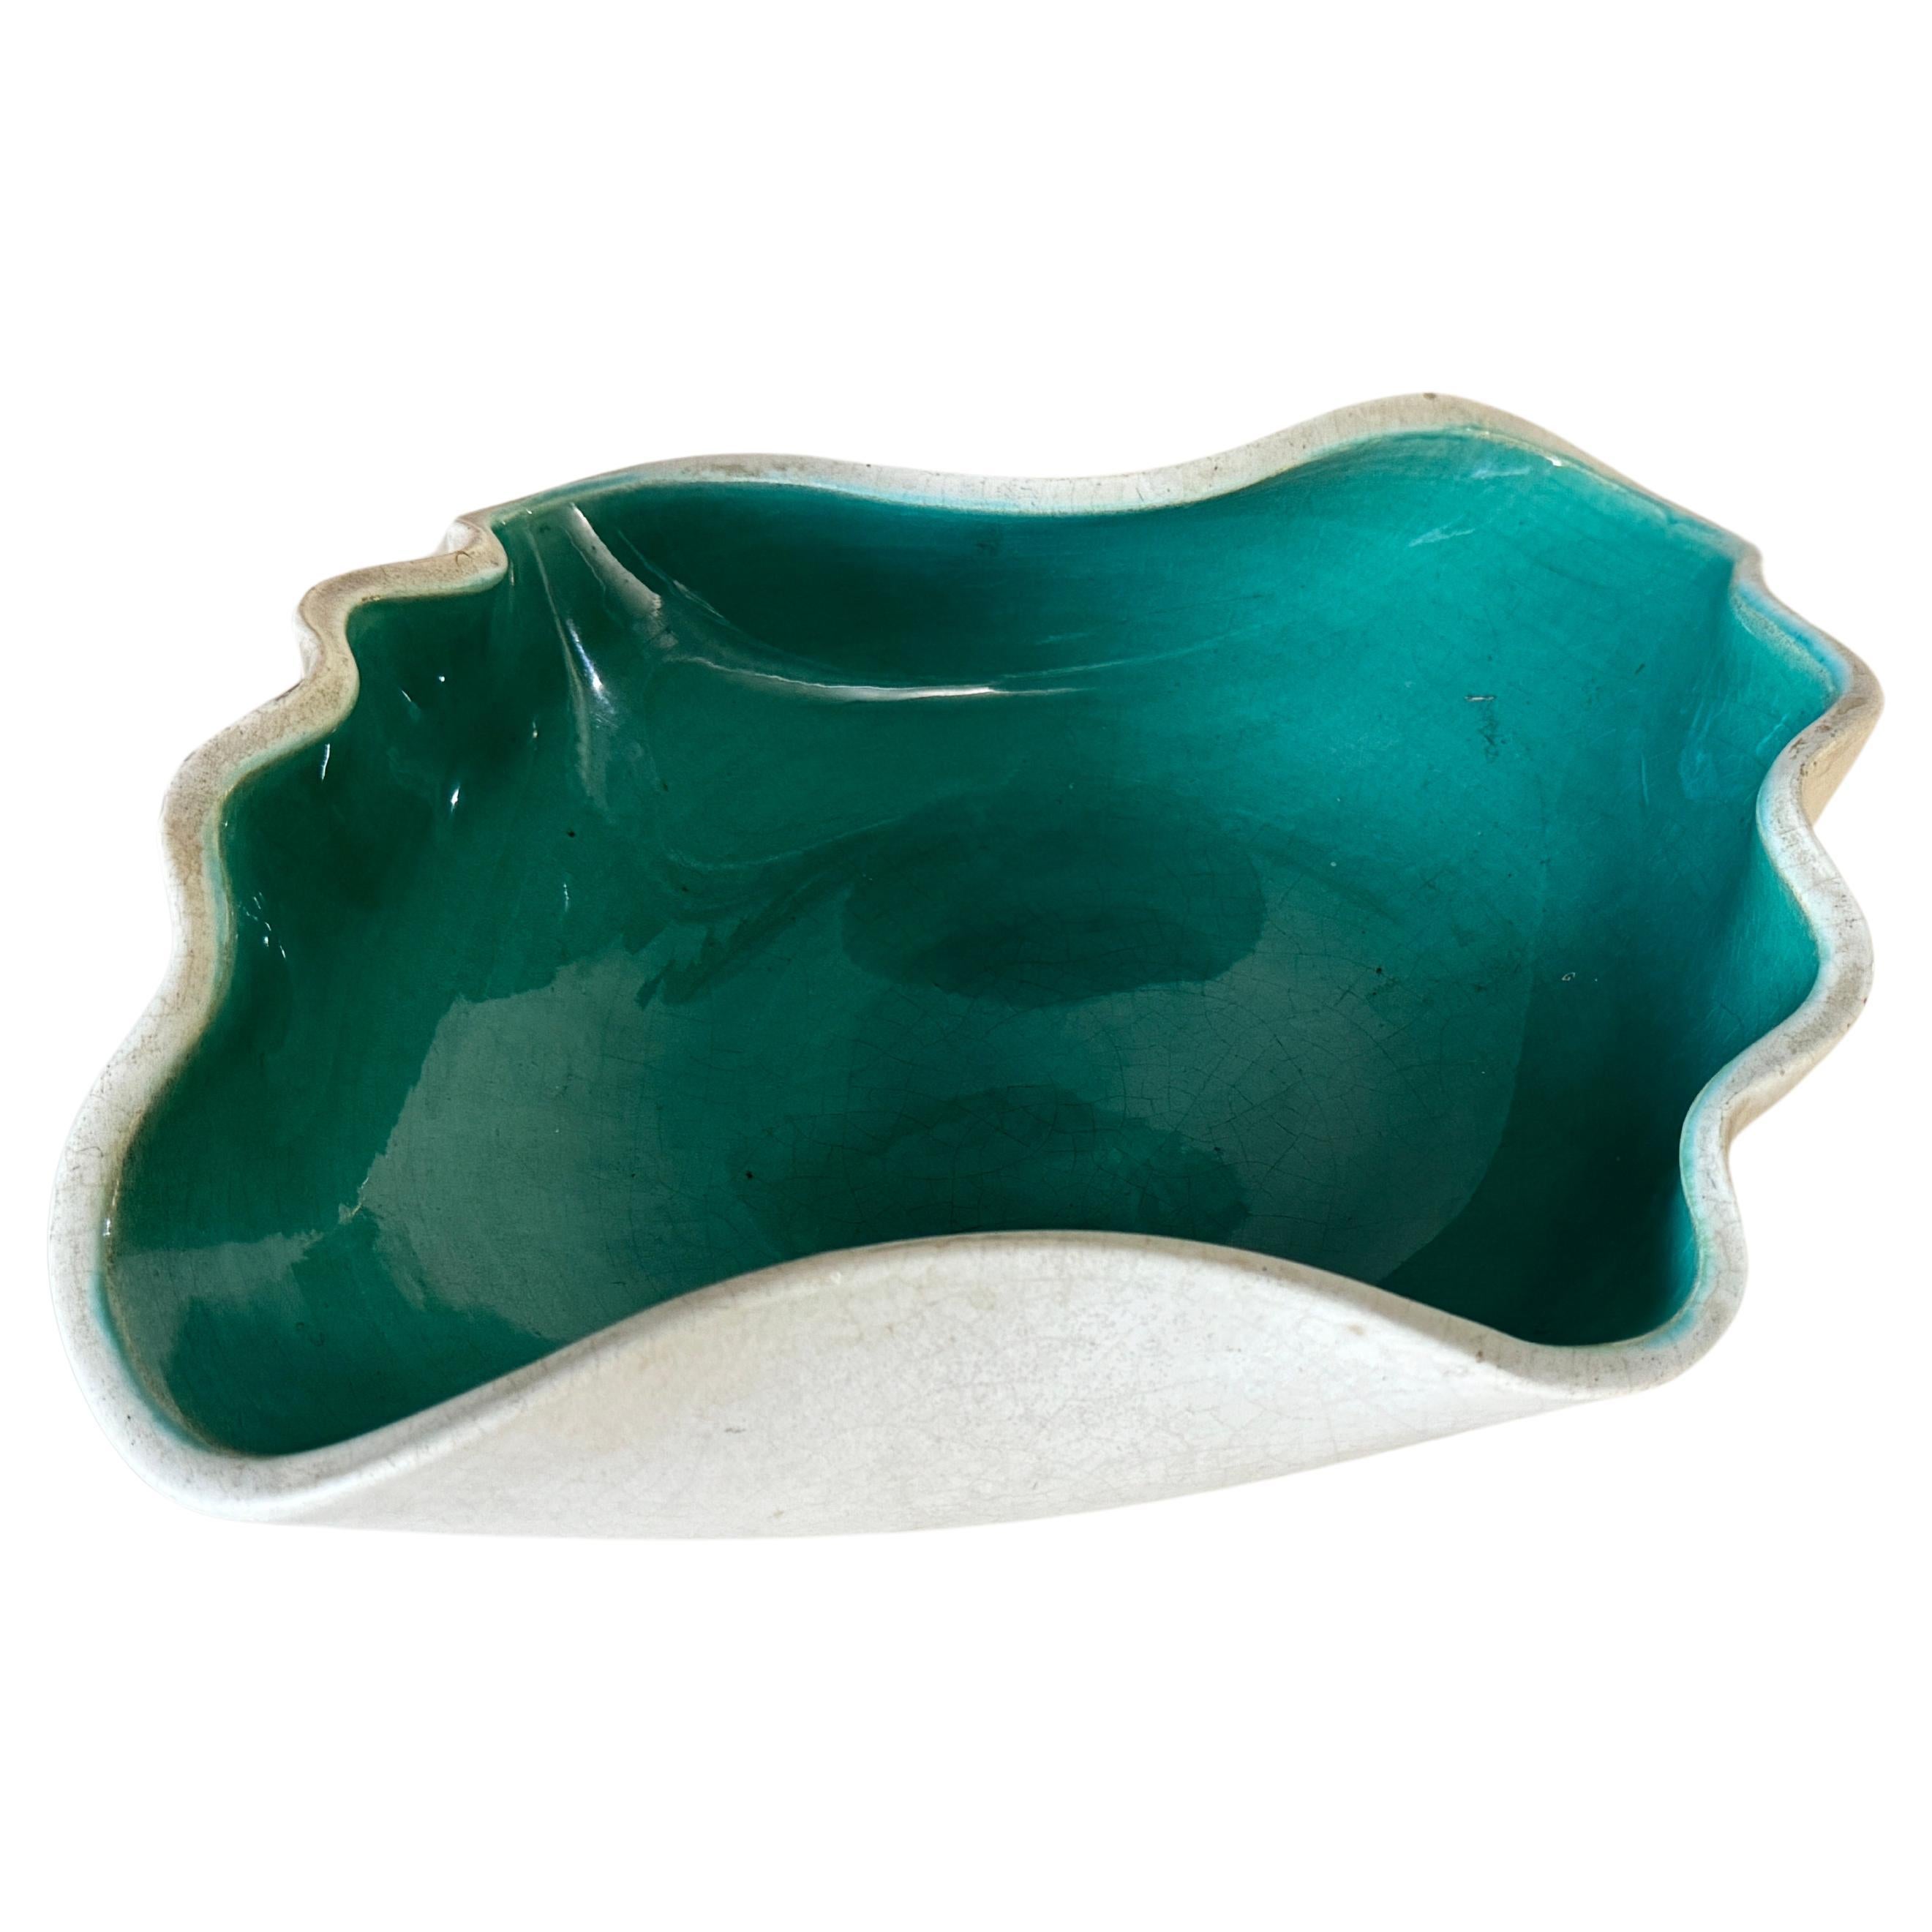 Mid-Century French Decorative Ceramic Dish / Vide-Poche by Elchinger 1960s Green For Sale